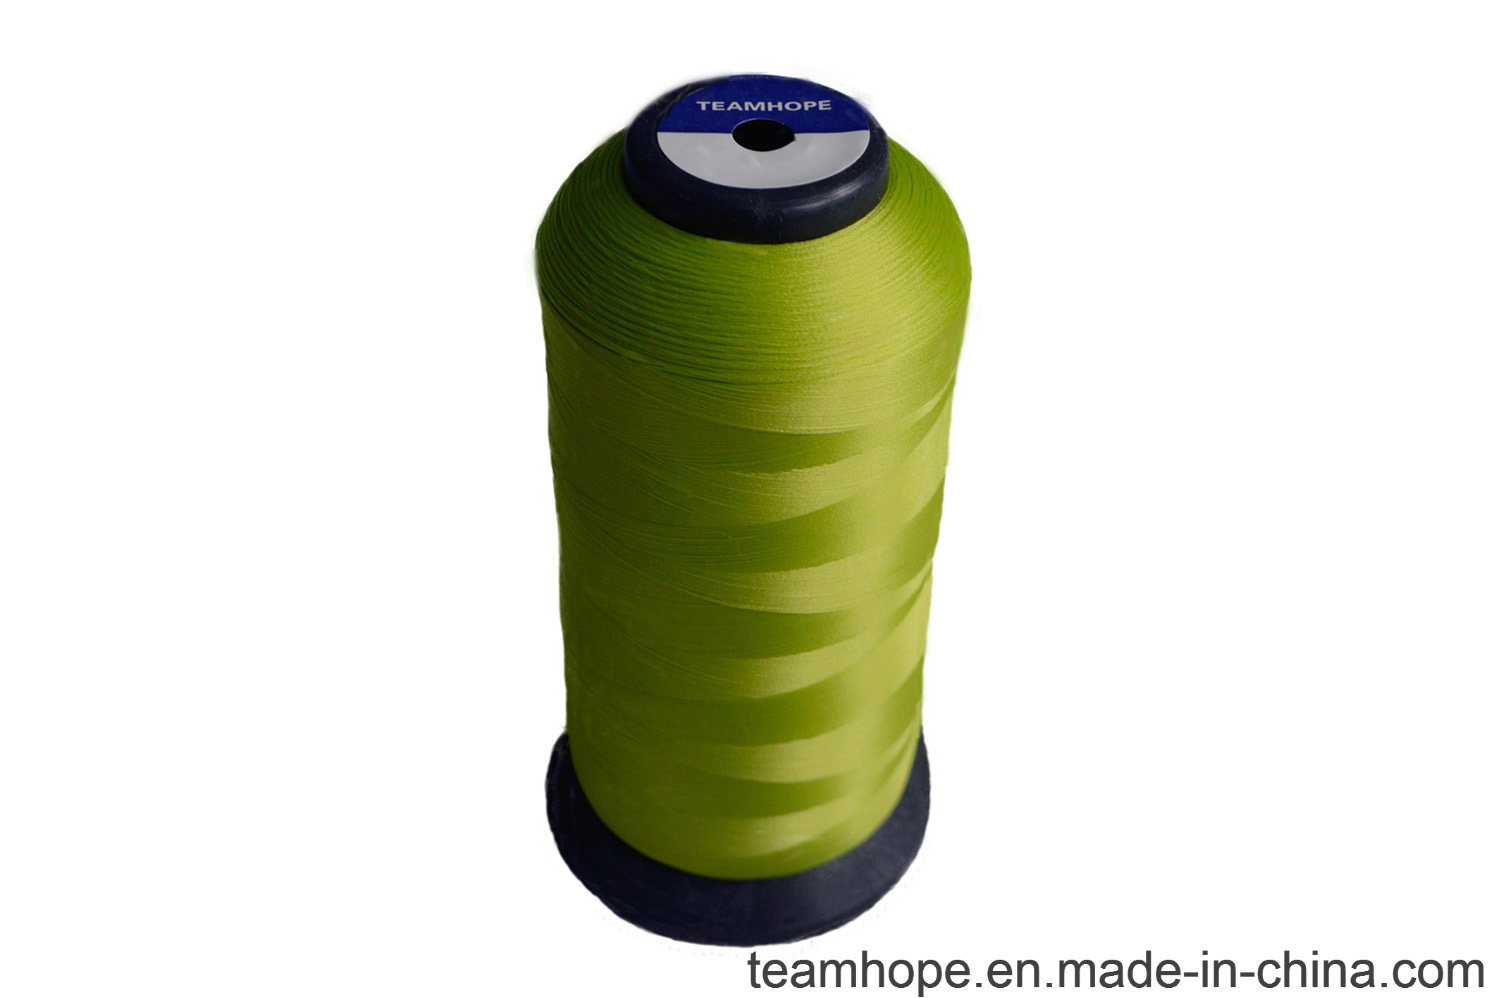 High Elastic Textured Nylon Sewing Thread 70d/2 & 100d/2 for Overlock Stitching